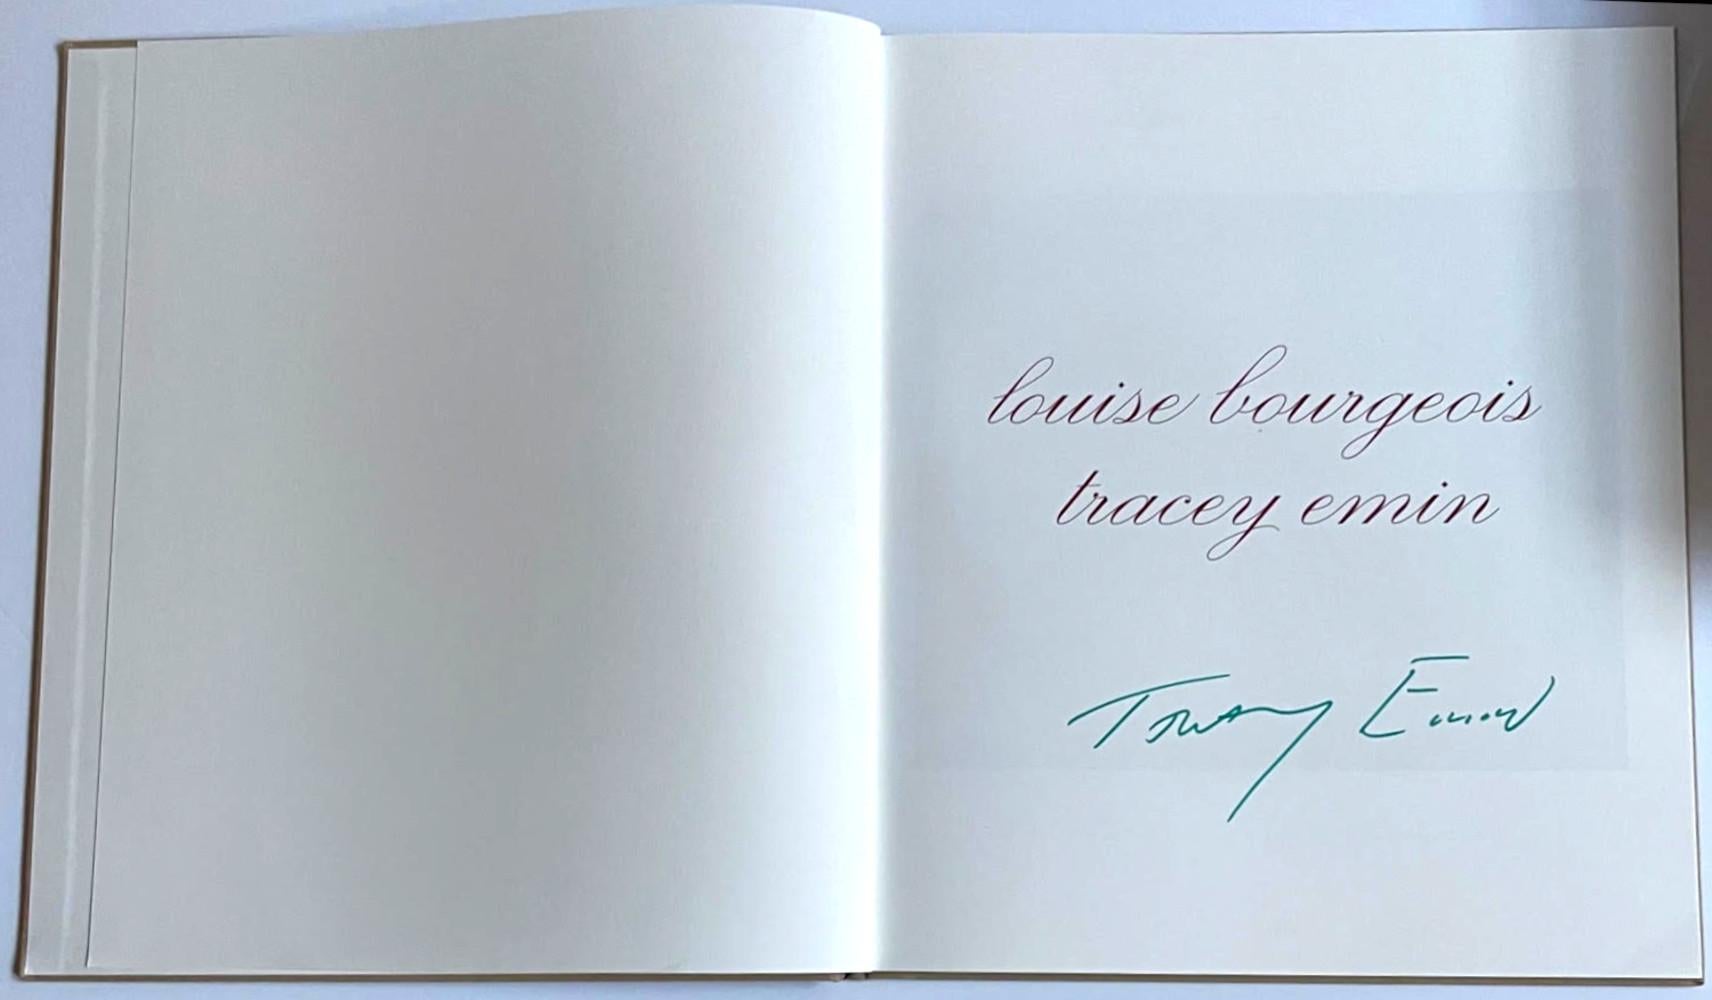 Do Not Abandon Me (Hand signed in green marker by Tracey Emin) - Print by Louise Bourgeois & Tracey Emin